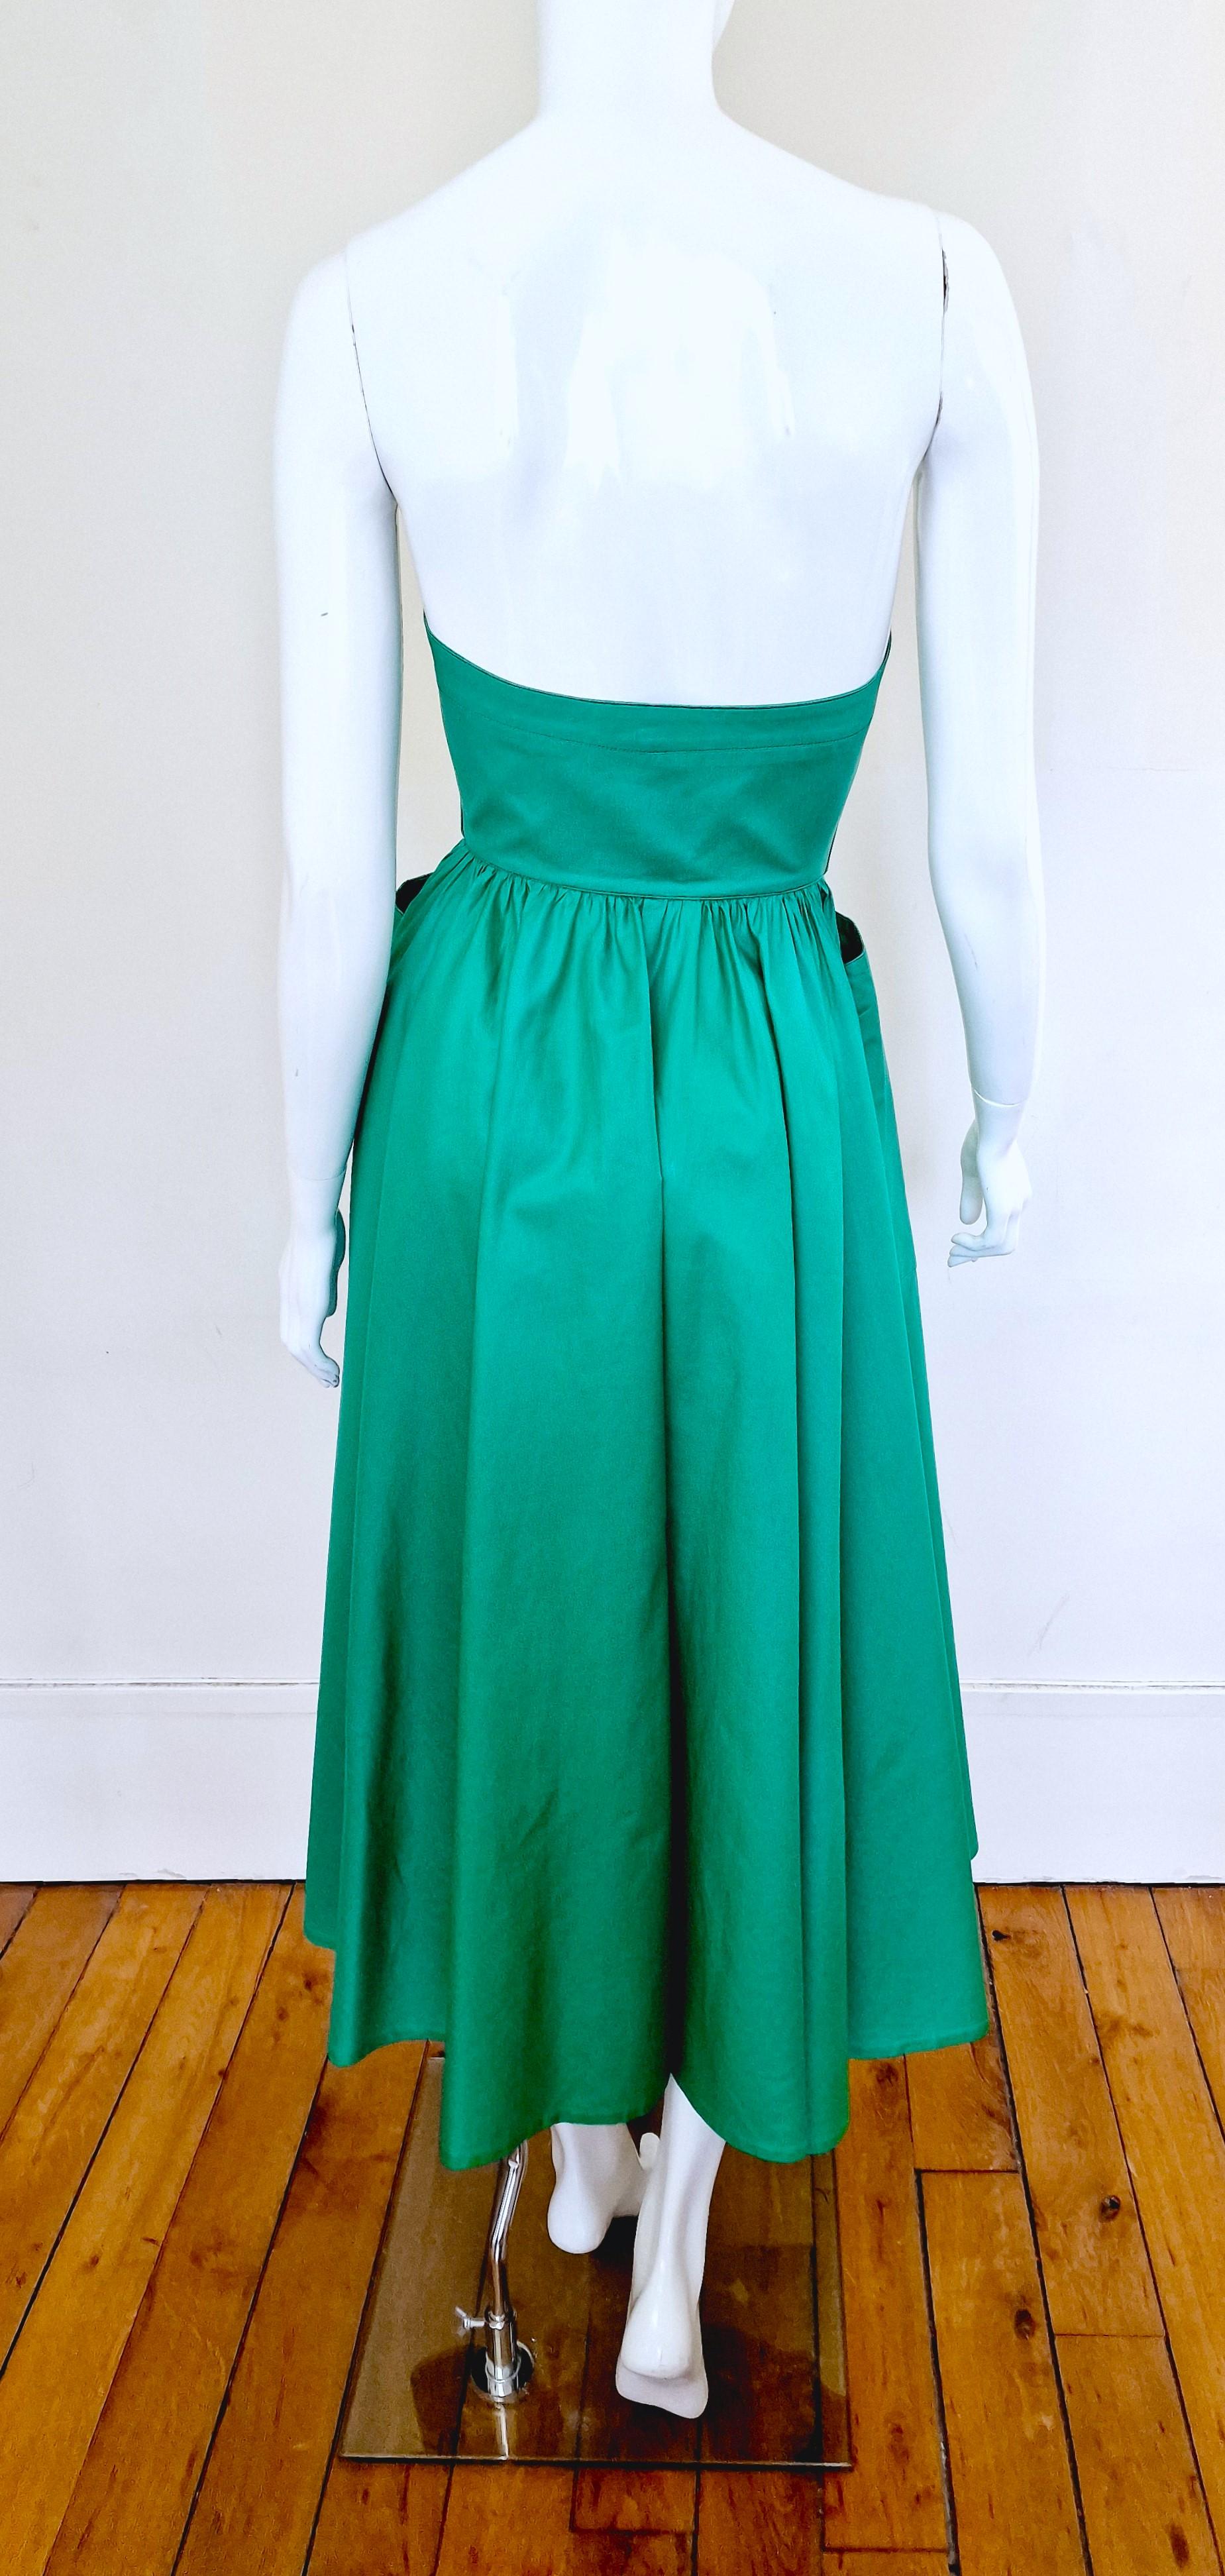 Thierry Mugler Corset Lace Up Green Vintage Couture Gown Prom Bustier Dress en vente 7